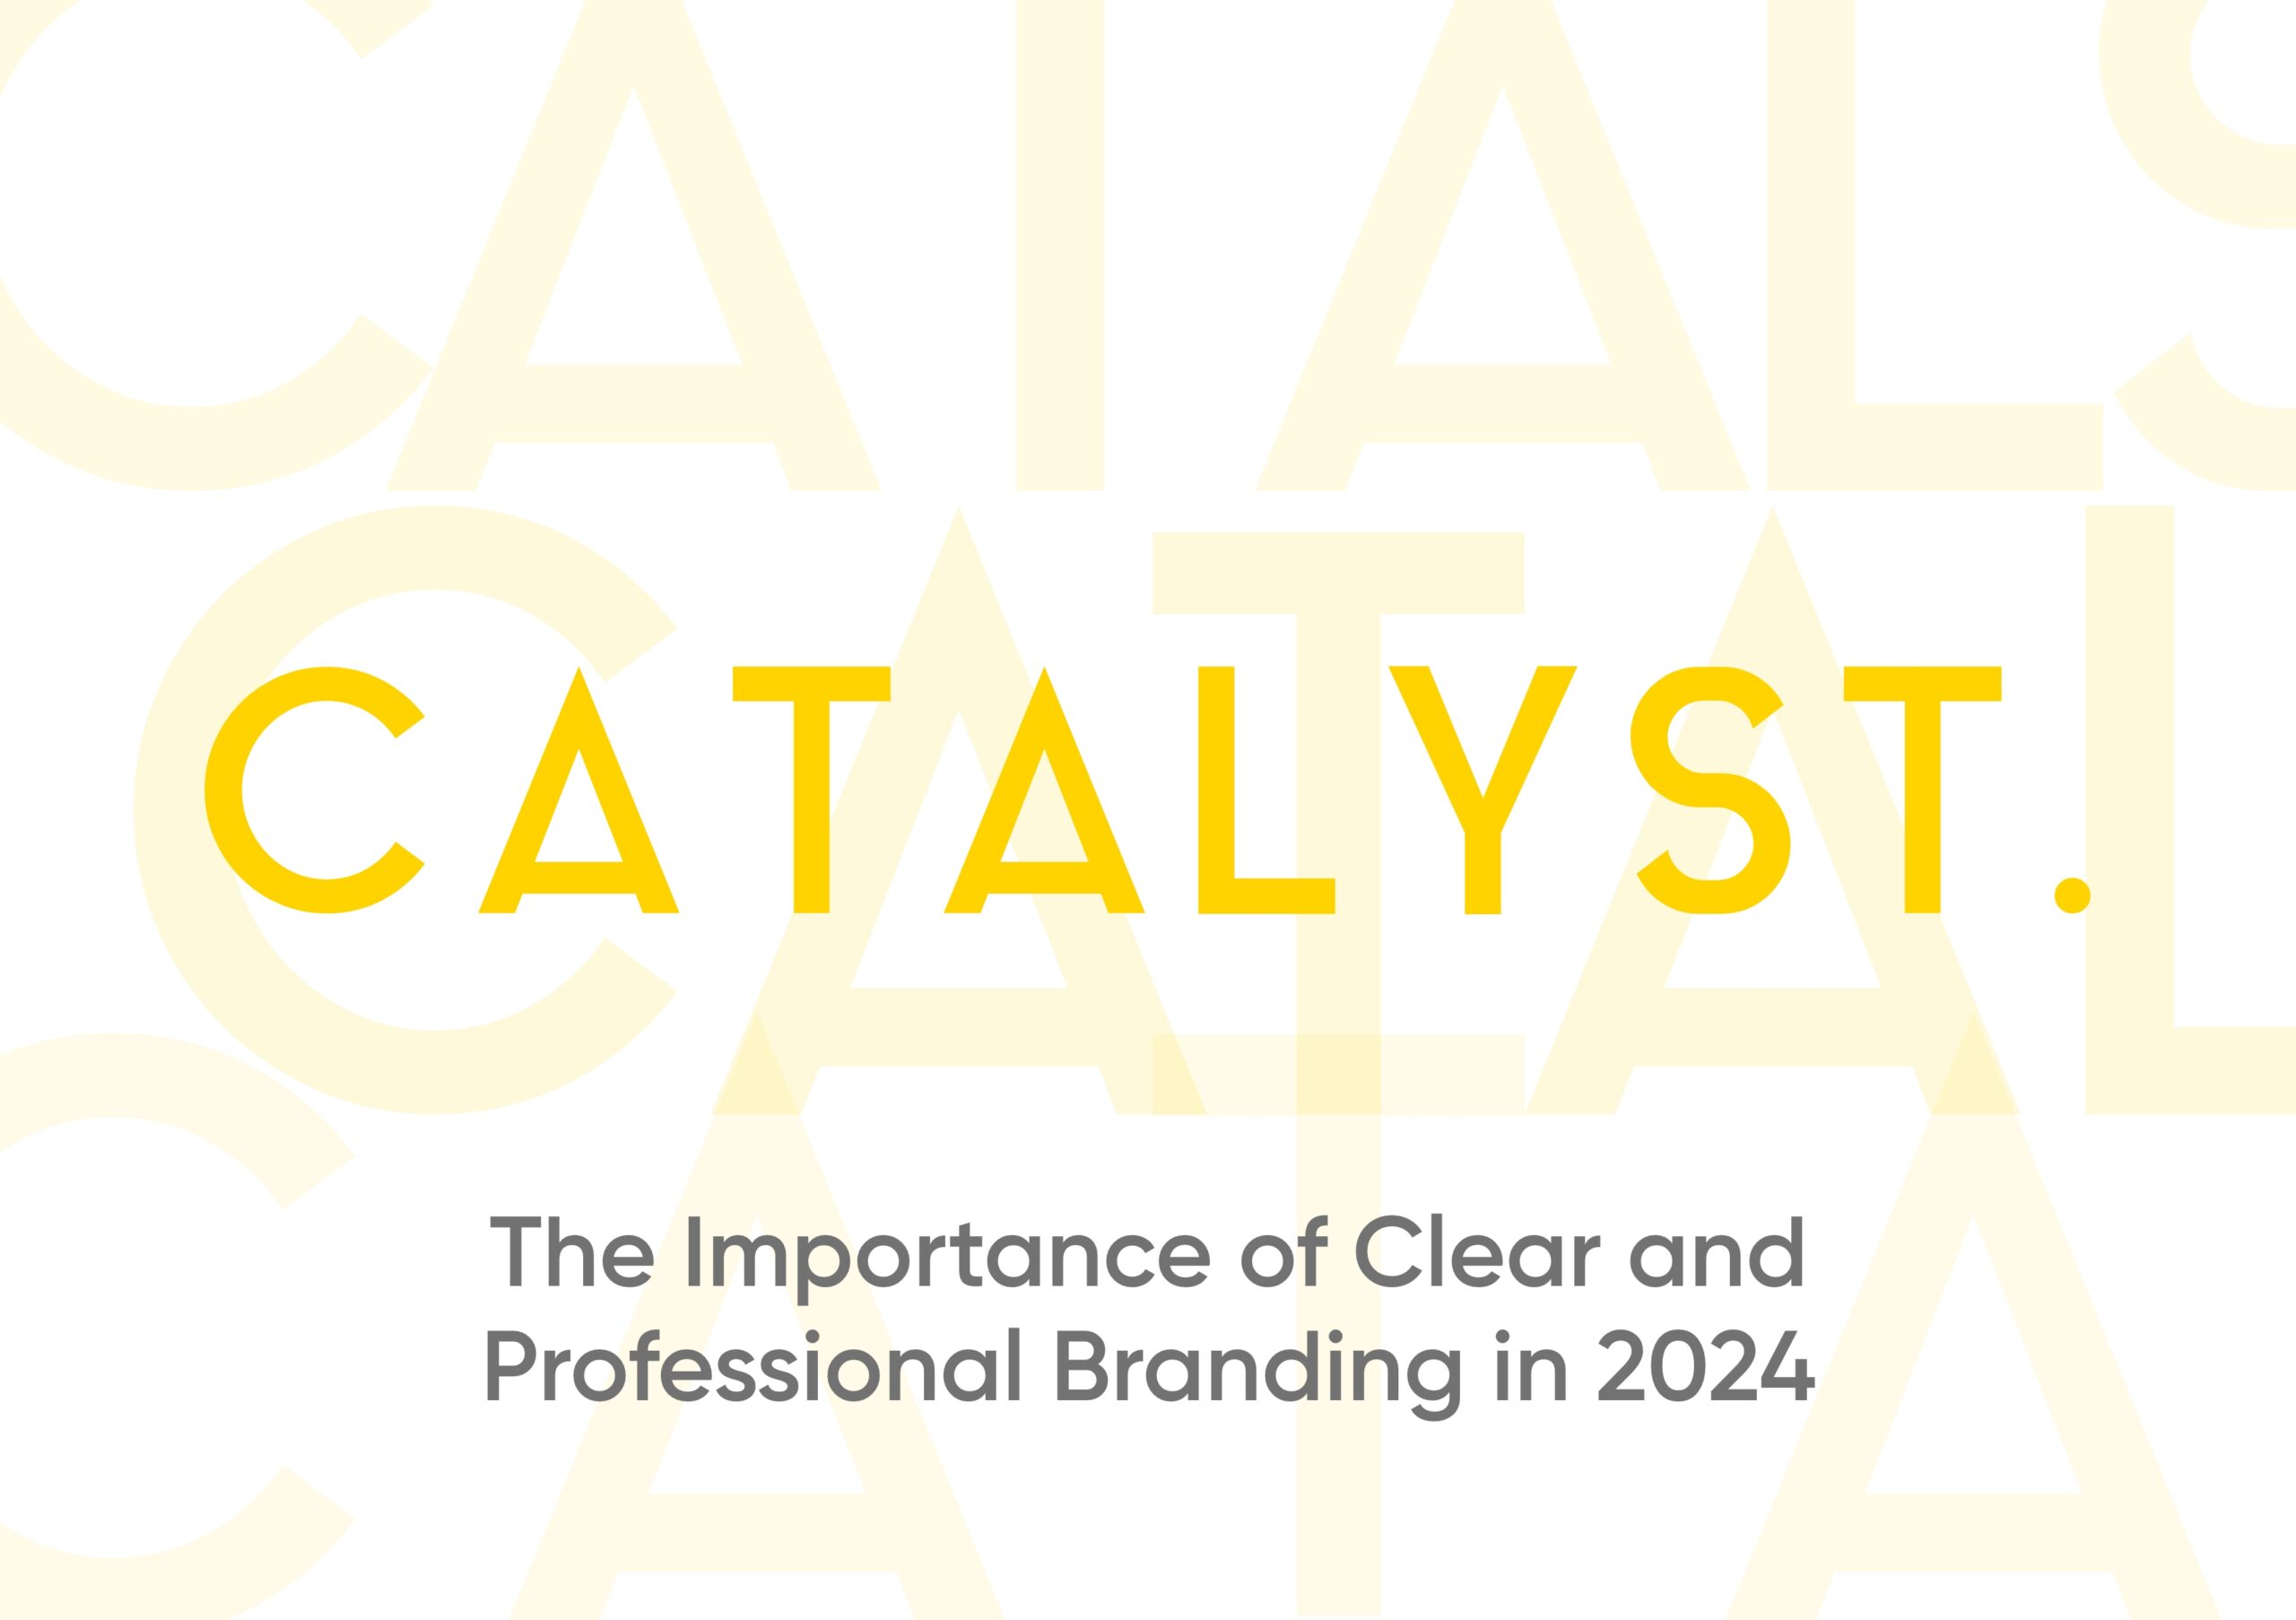 The Importance of Clear and Professional Branding in 2024